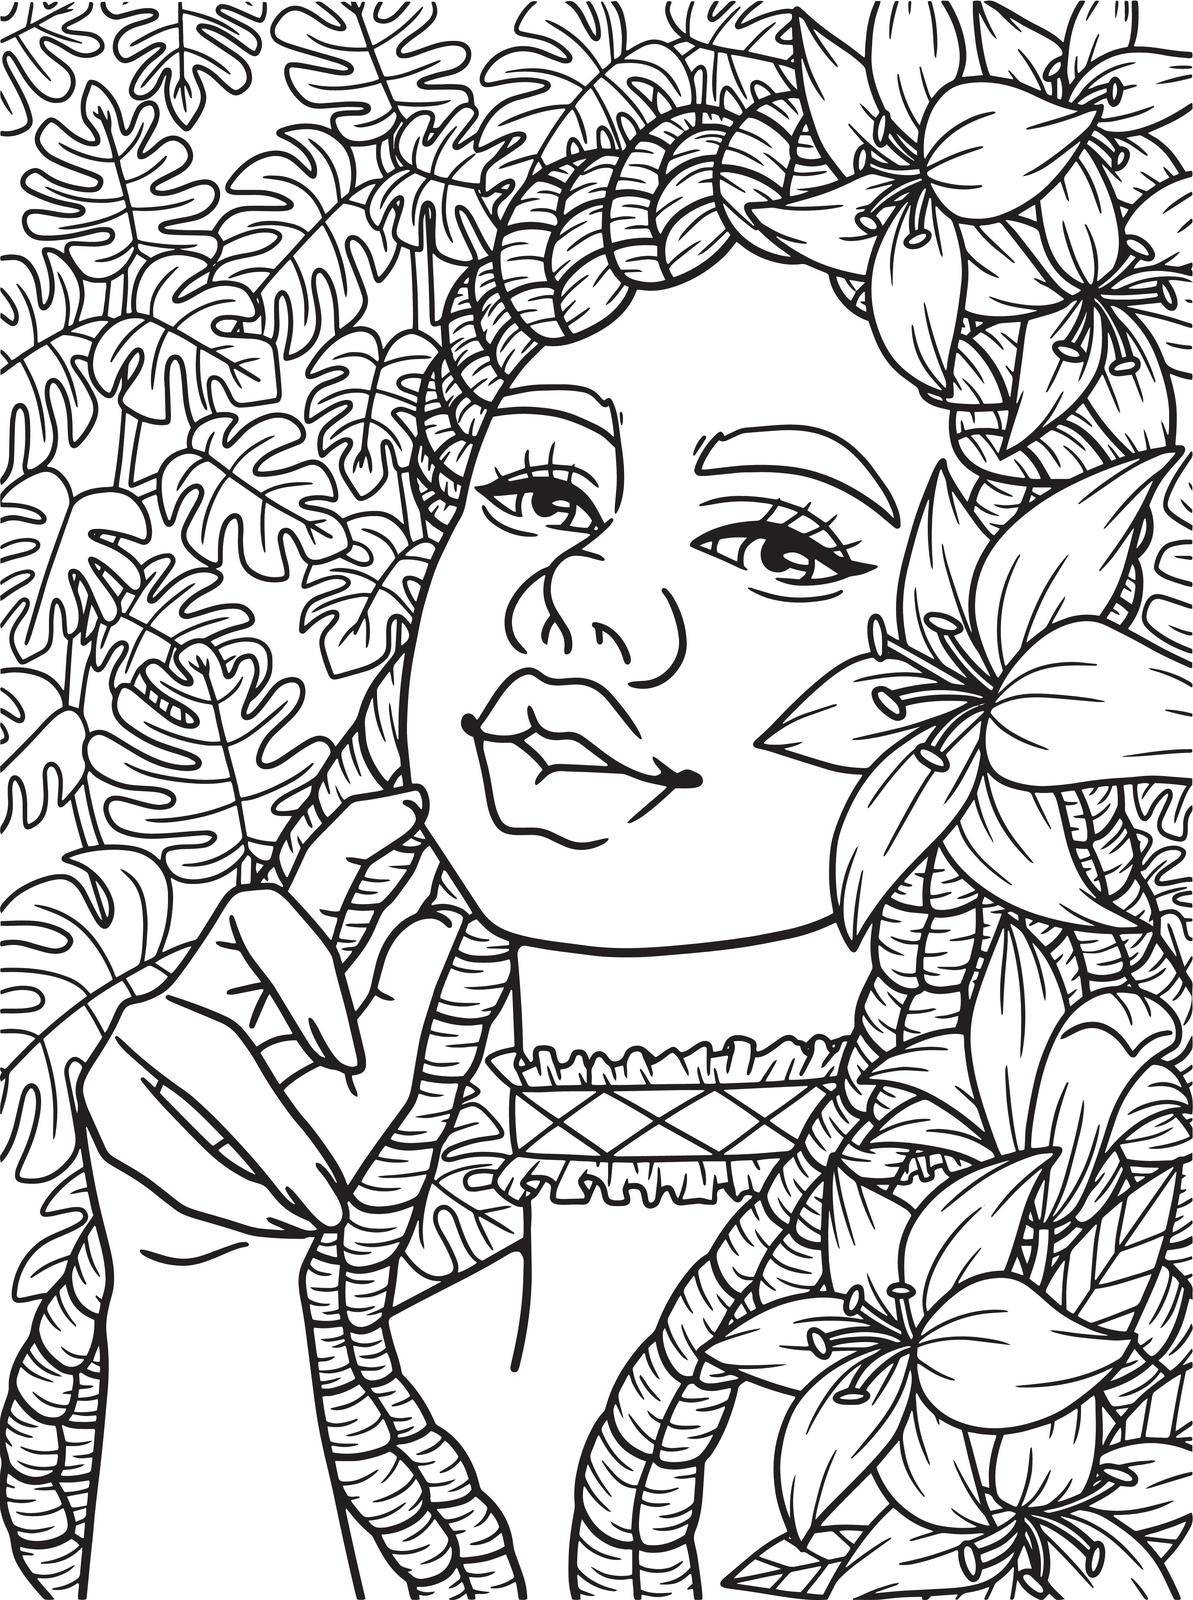 A cute and funny coloring page of an Afro-American flower girl. Provides hours of coloring fun for adults.